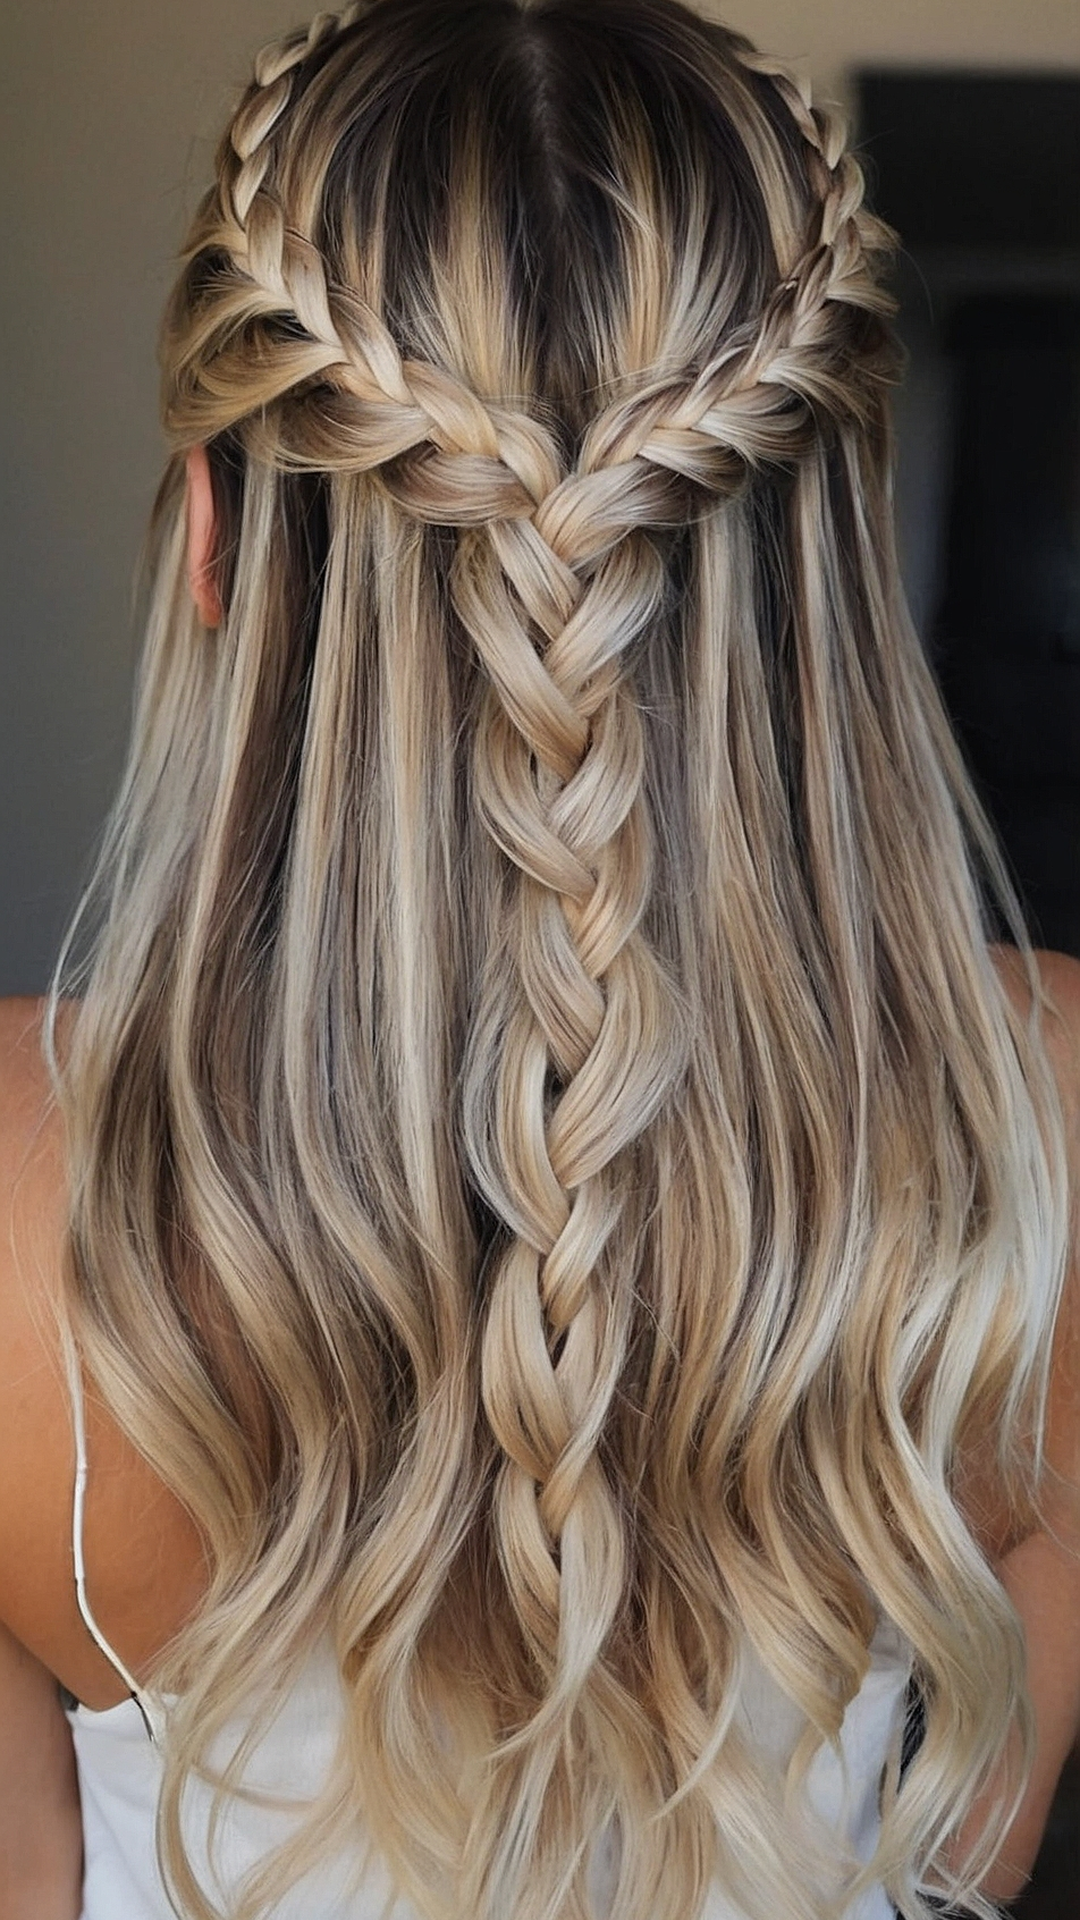 Braided Beauty: Elegant Hairstyle Inspirations